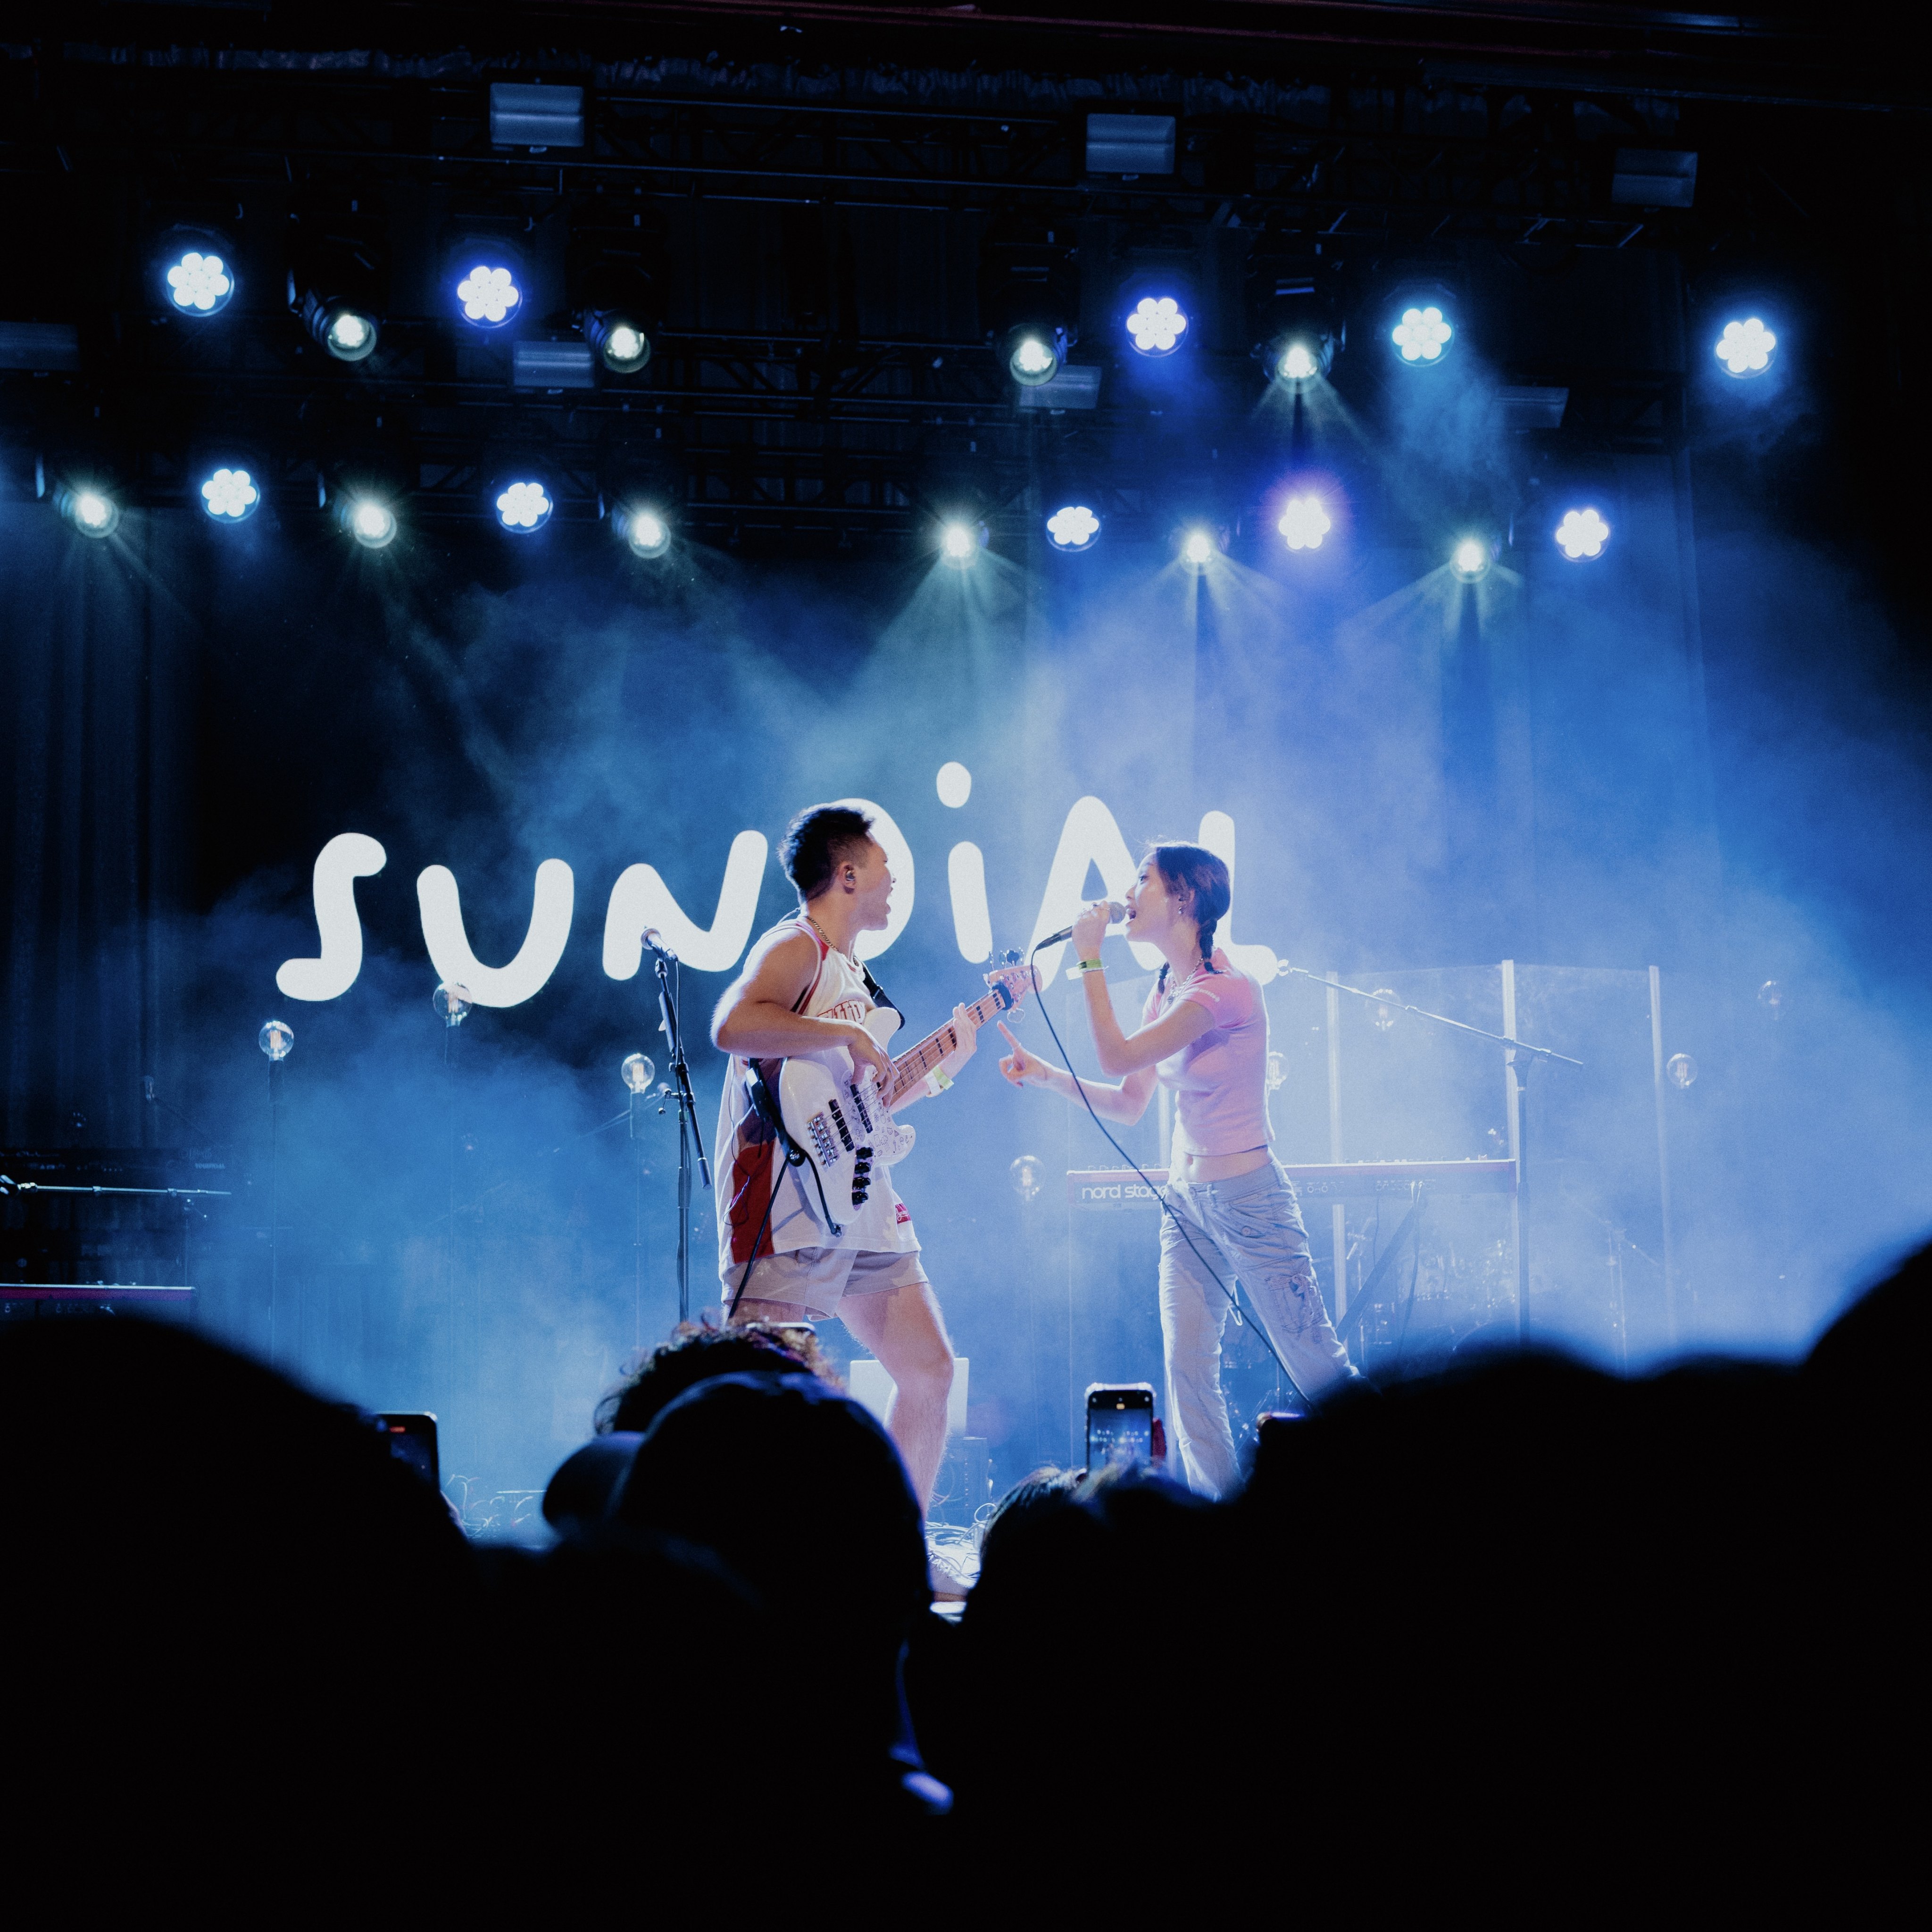 Sundial - singer-songwriters Dorothy Chan and Jisu Kim - have just released their EP “The Roaring Twenties”, with songs about the complicated feelings that come with growing up and being in one’s mid-twenties. Photo: Sundial